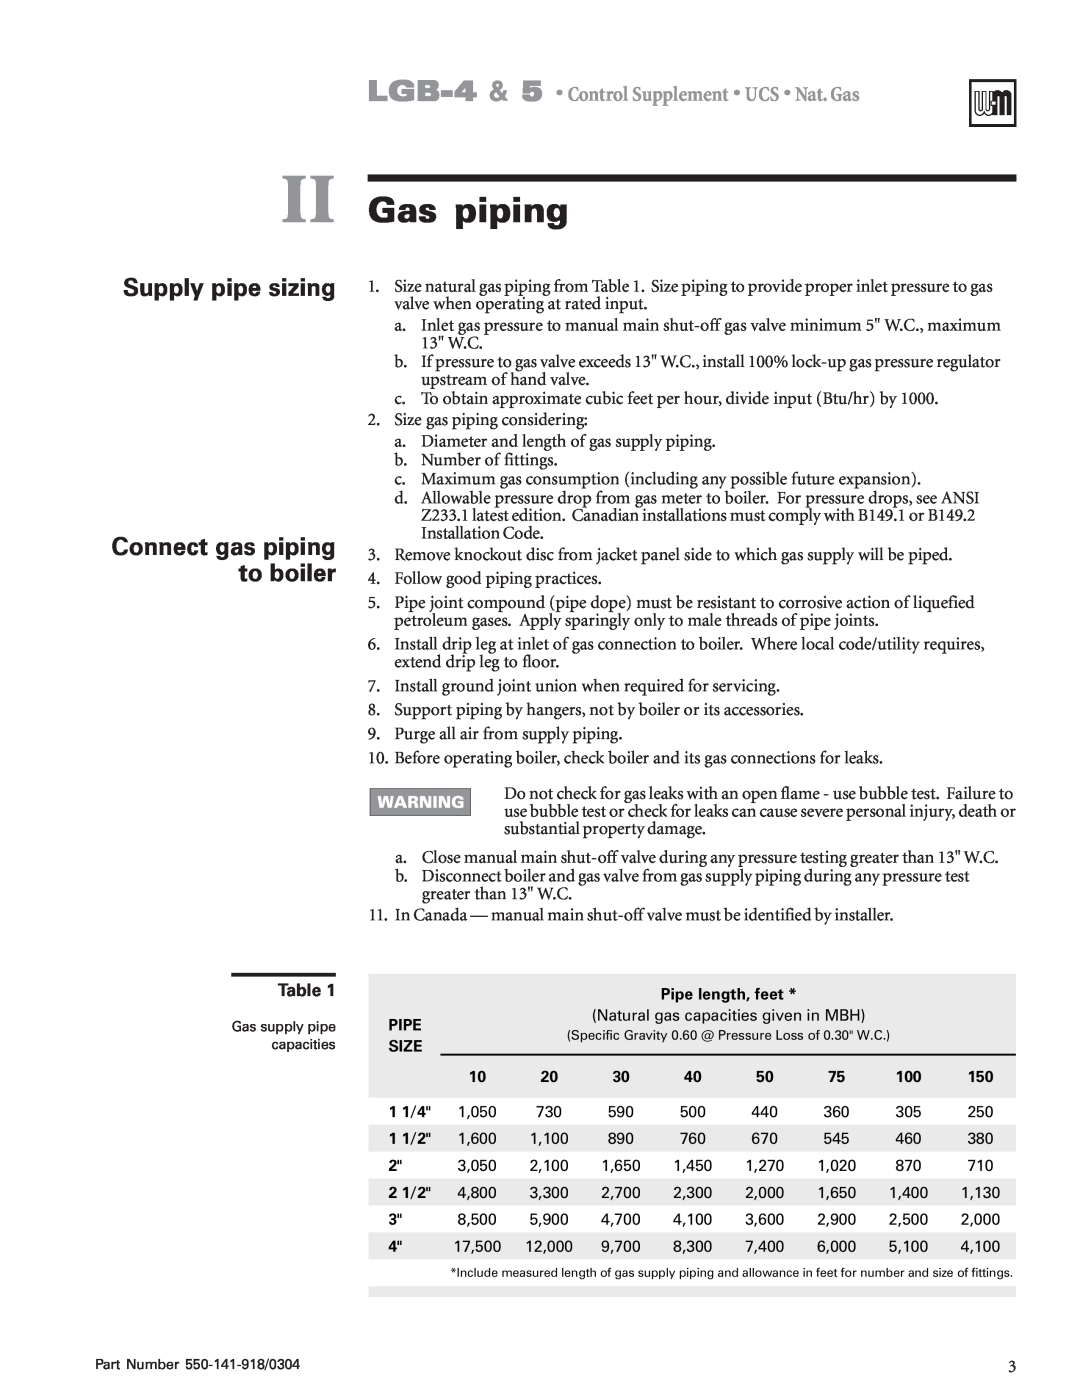 Weil-McLain LGB-4, LGB-5 operating instructions II Gas piping, Supply pipe sizing, Connect gas piping to boiler 